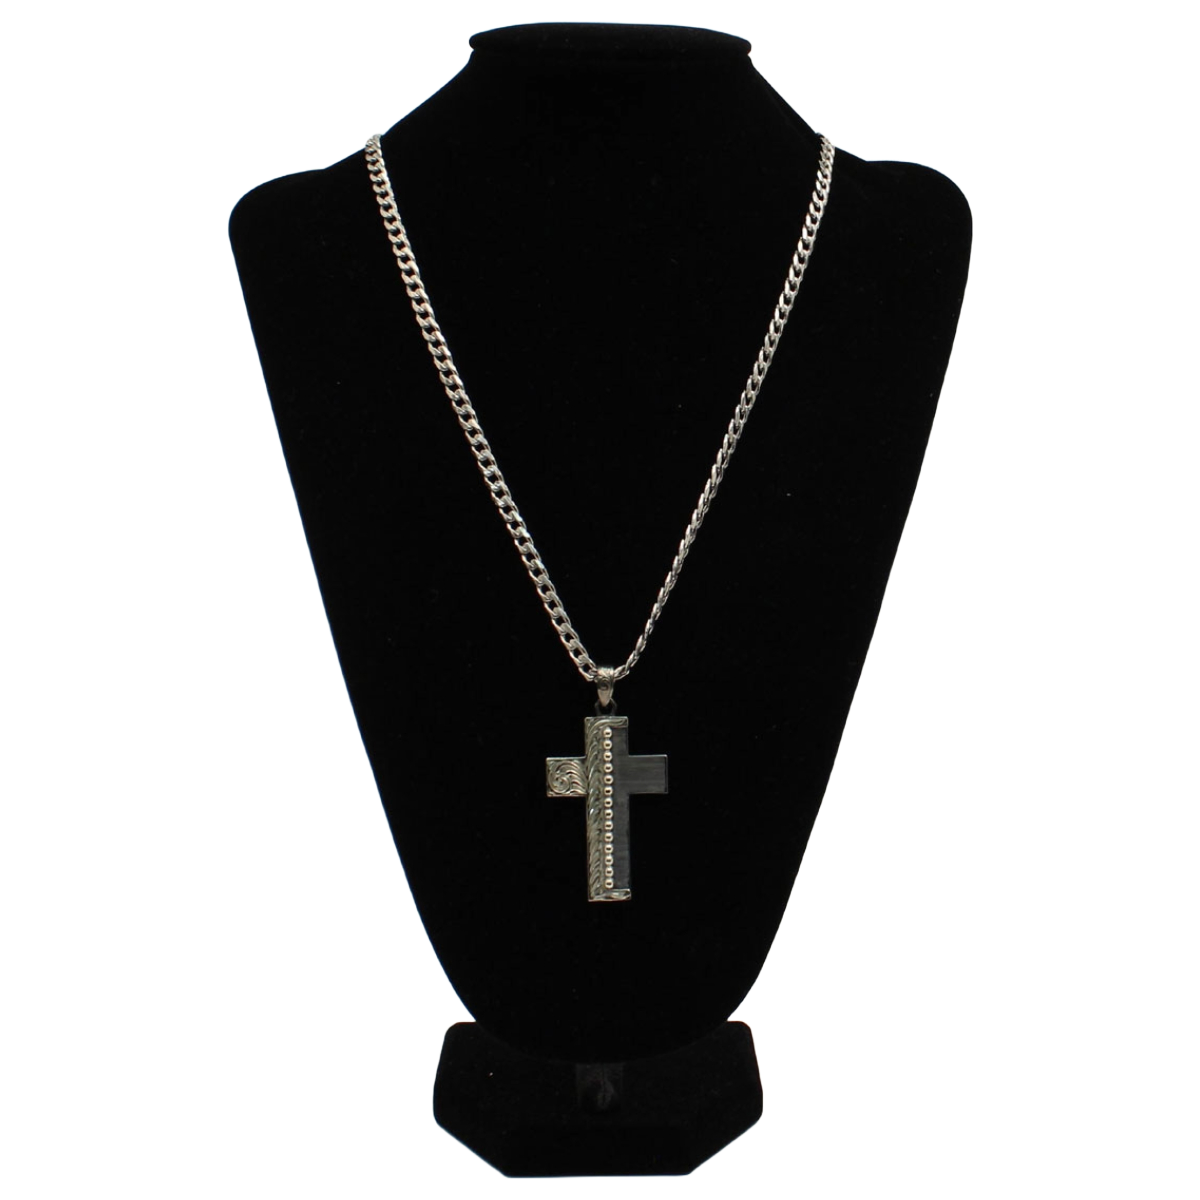 Silver Strike Ladies Beaded Cross Pendant Chain Silver Necklace D47003